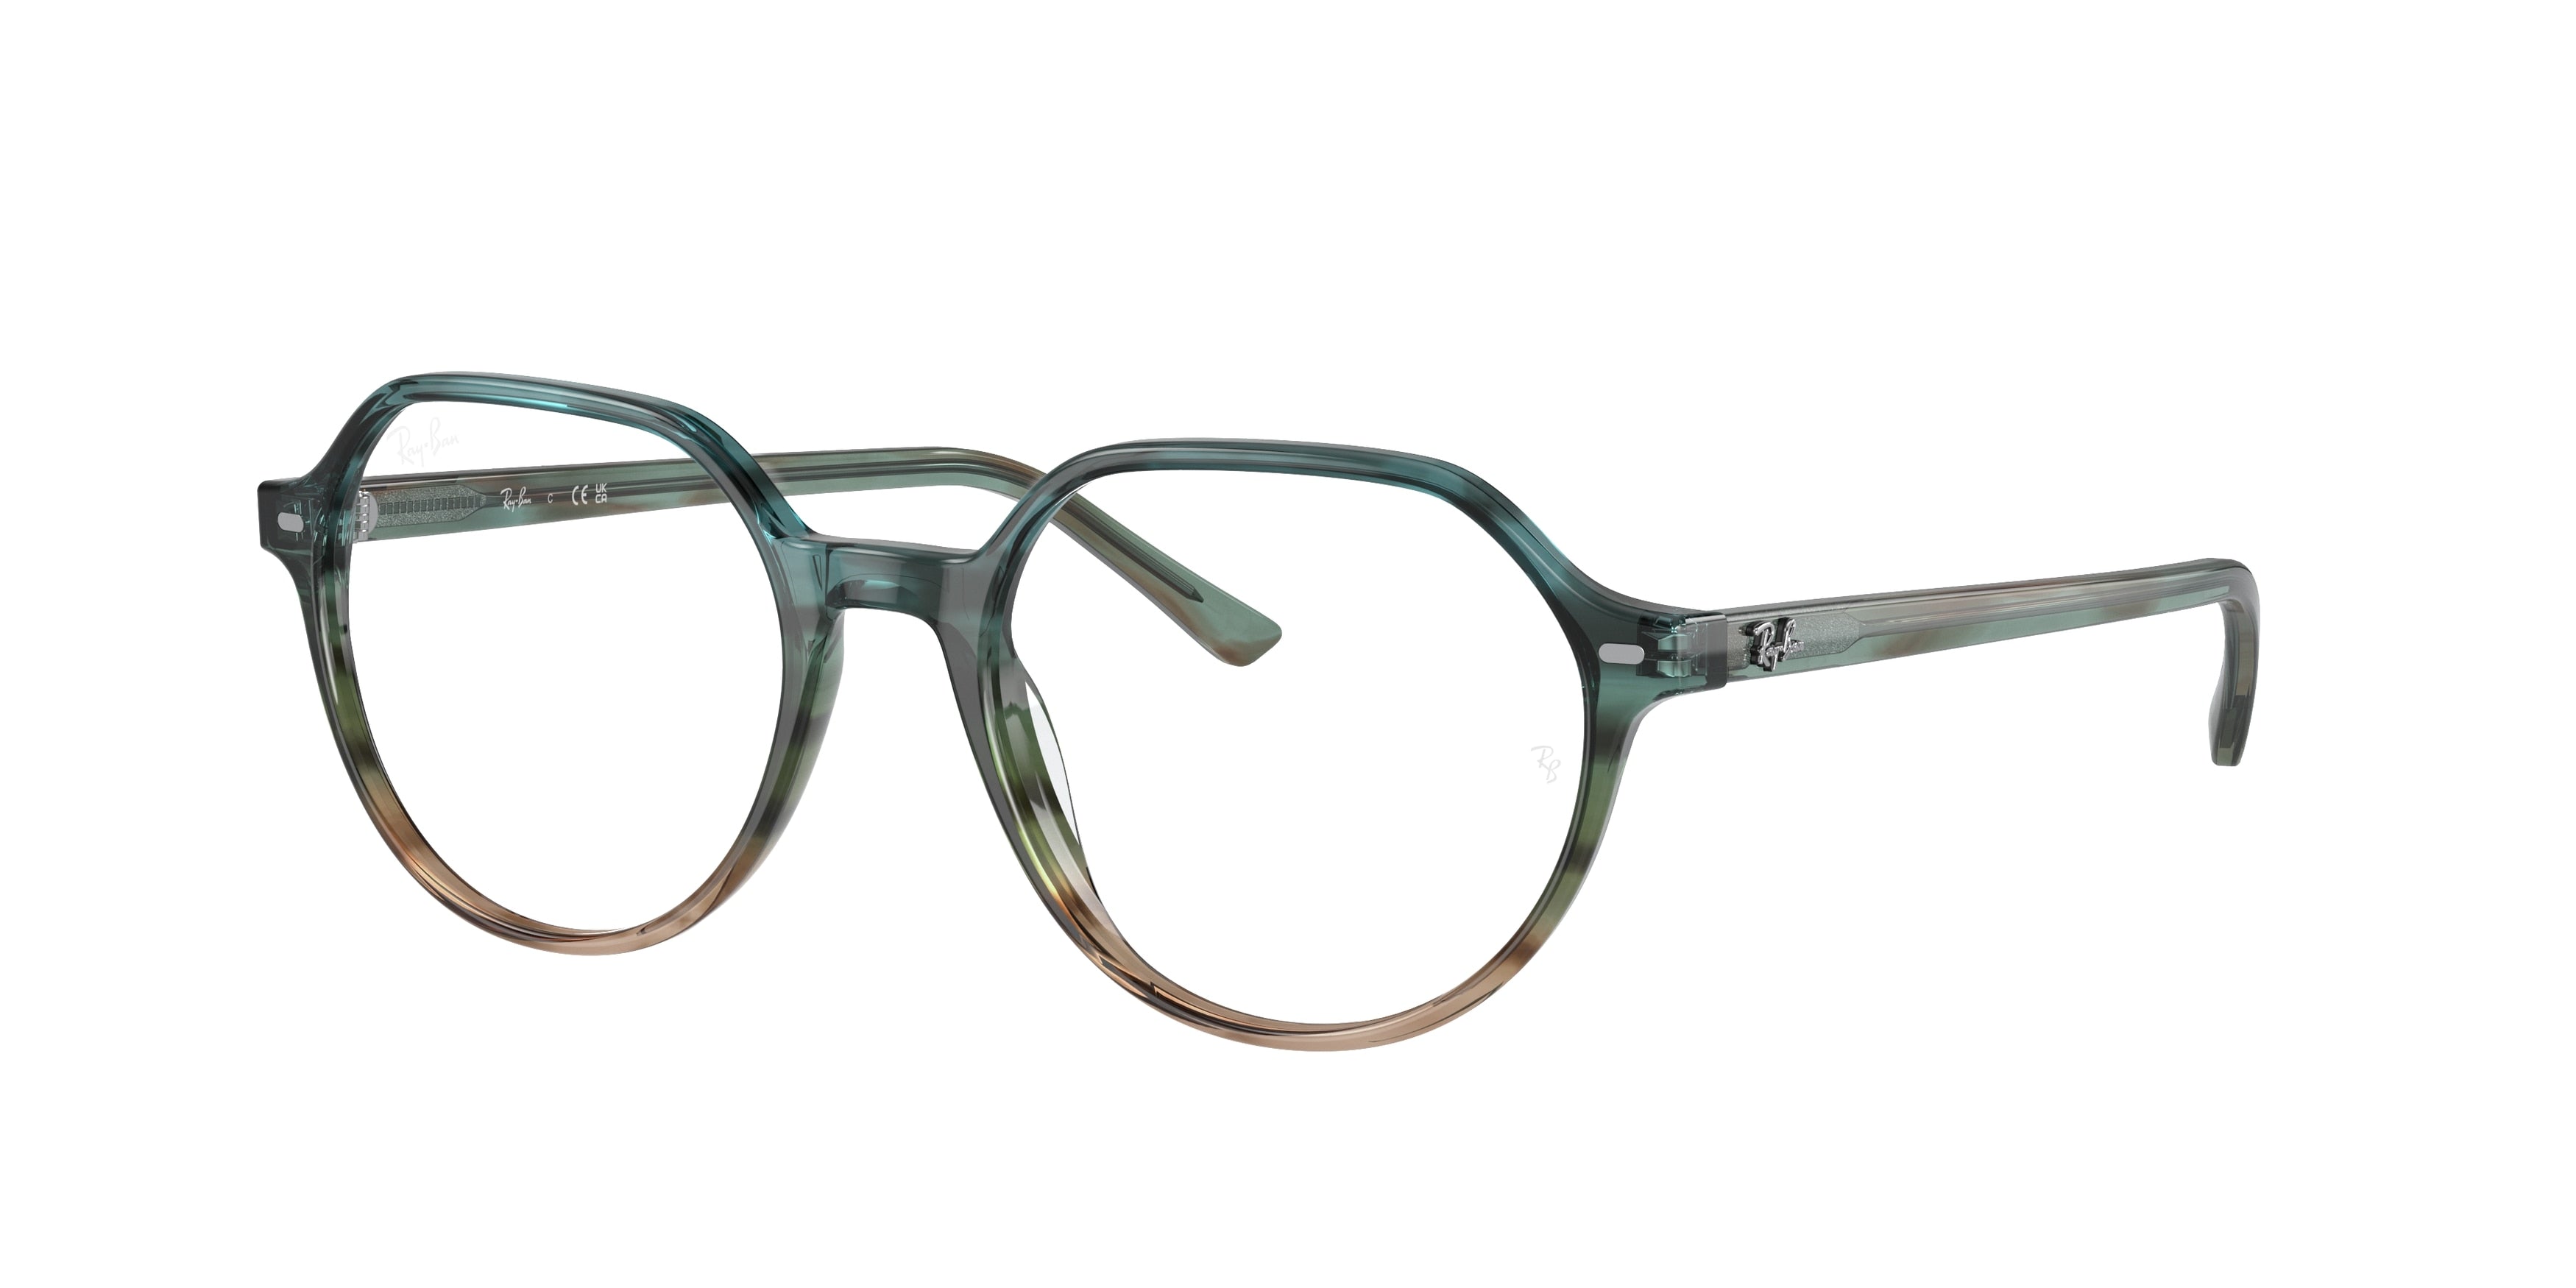 Ray-Ban Optical THALIA RX5395 Square Eyeglasses  8252-Striped Blue & Green 51-145-18 - Color Map Multicolor